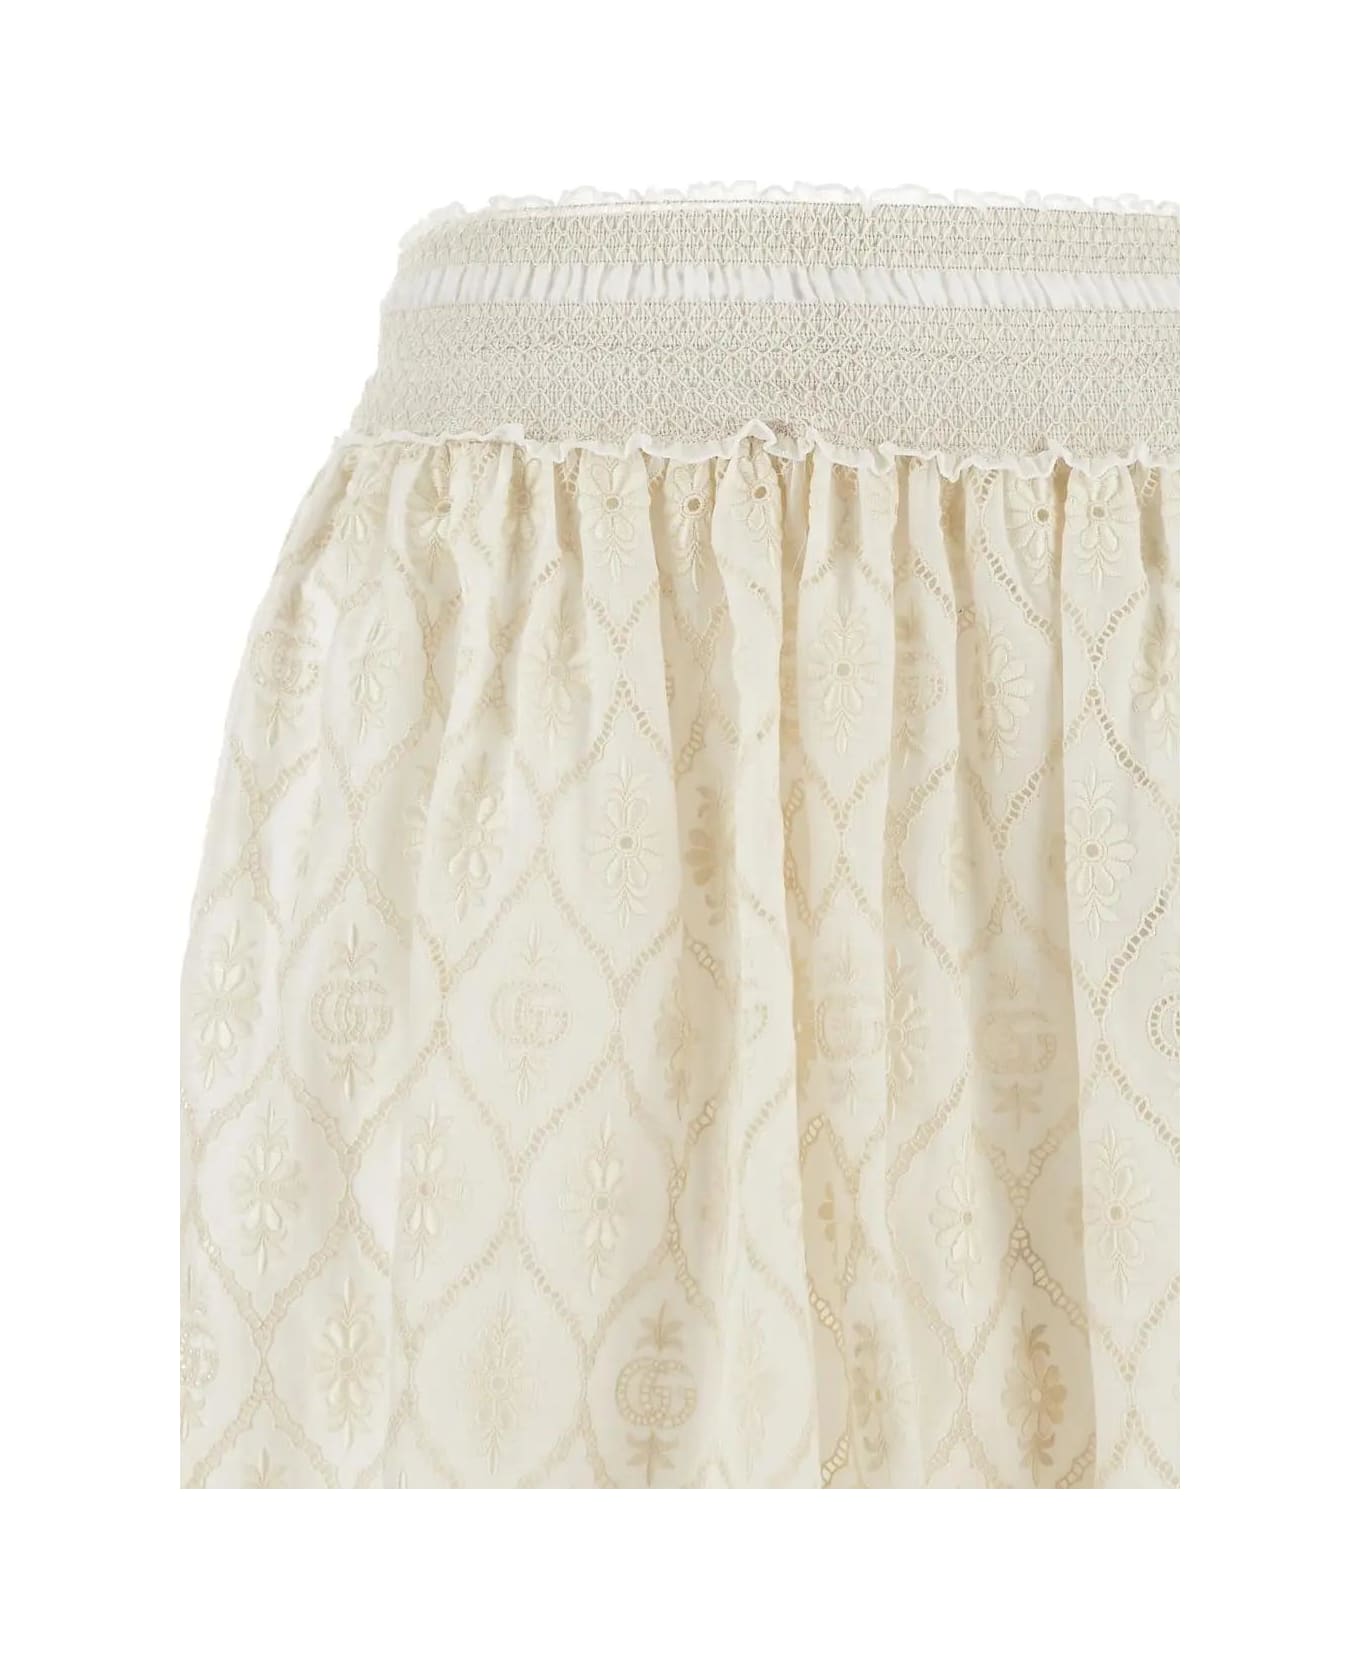 Gucci Double G Flower Lace Skirt - White